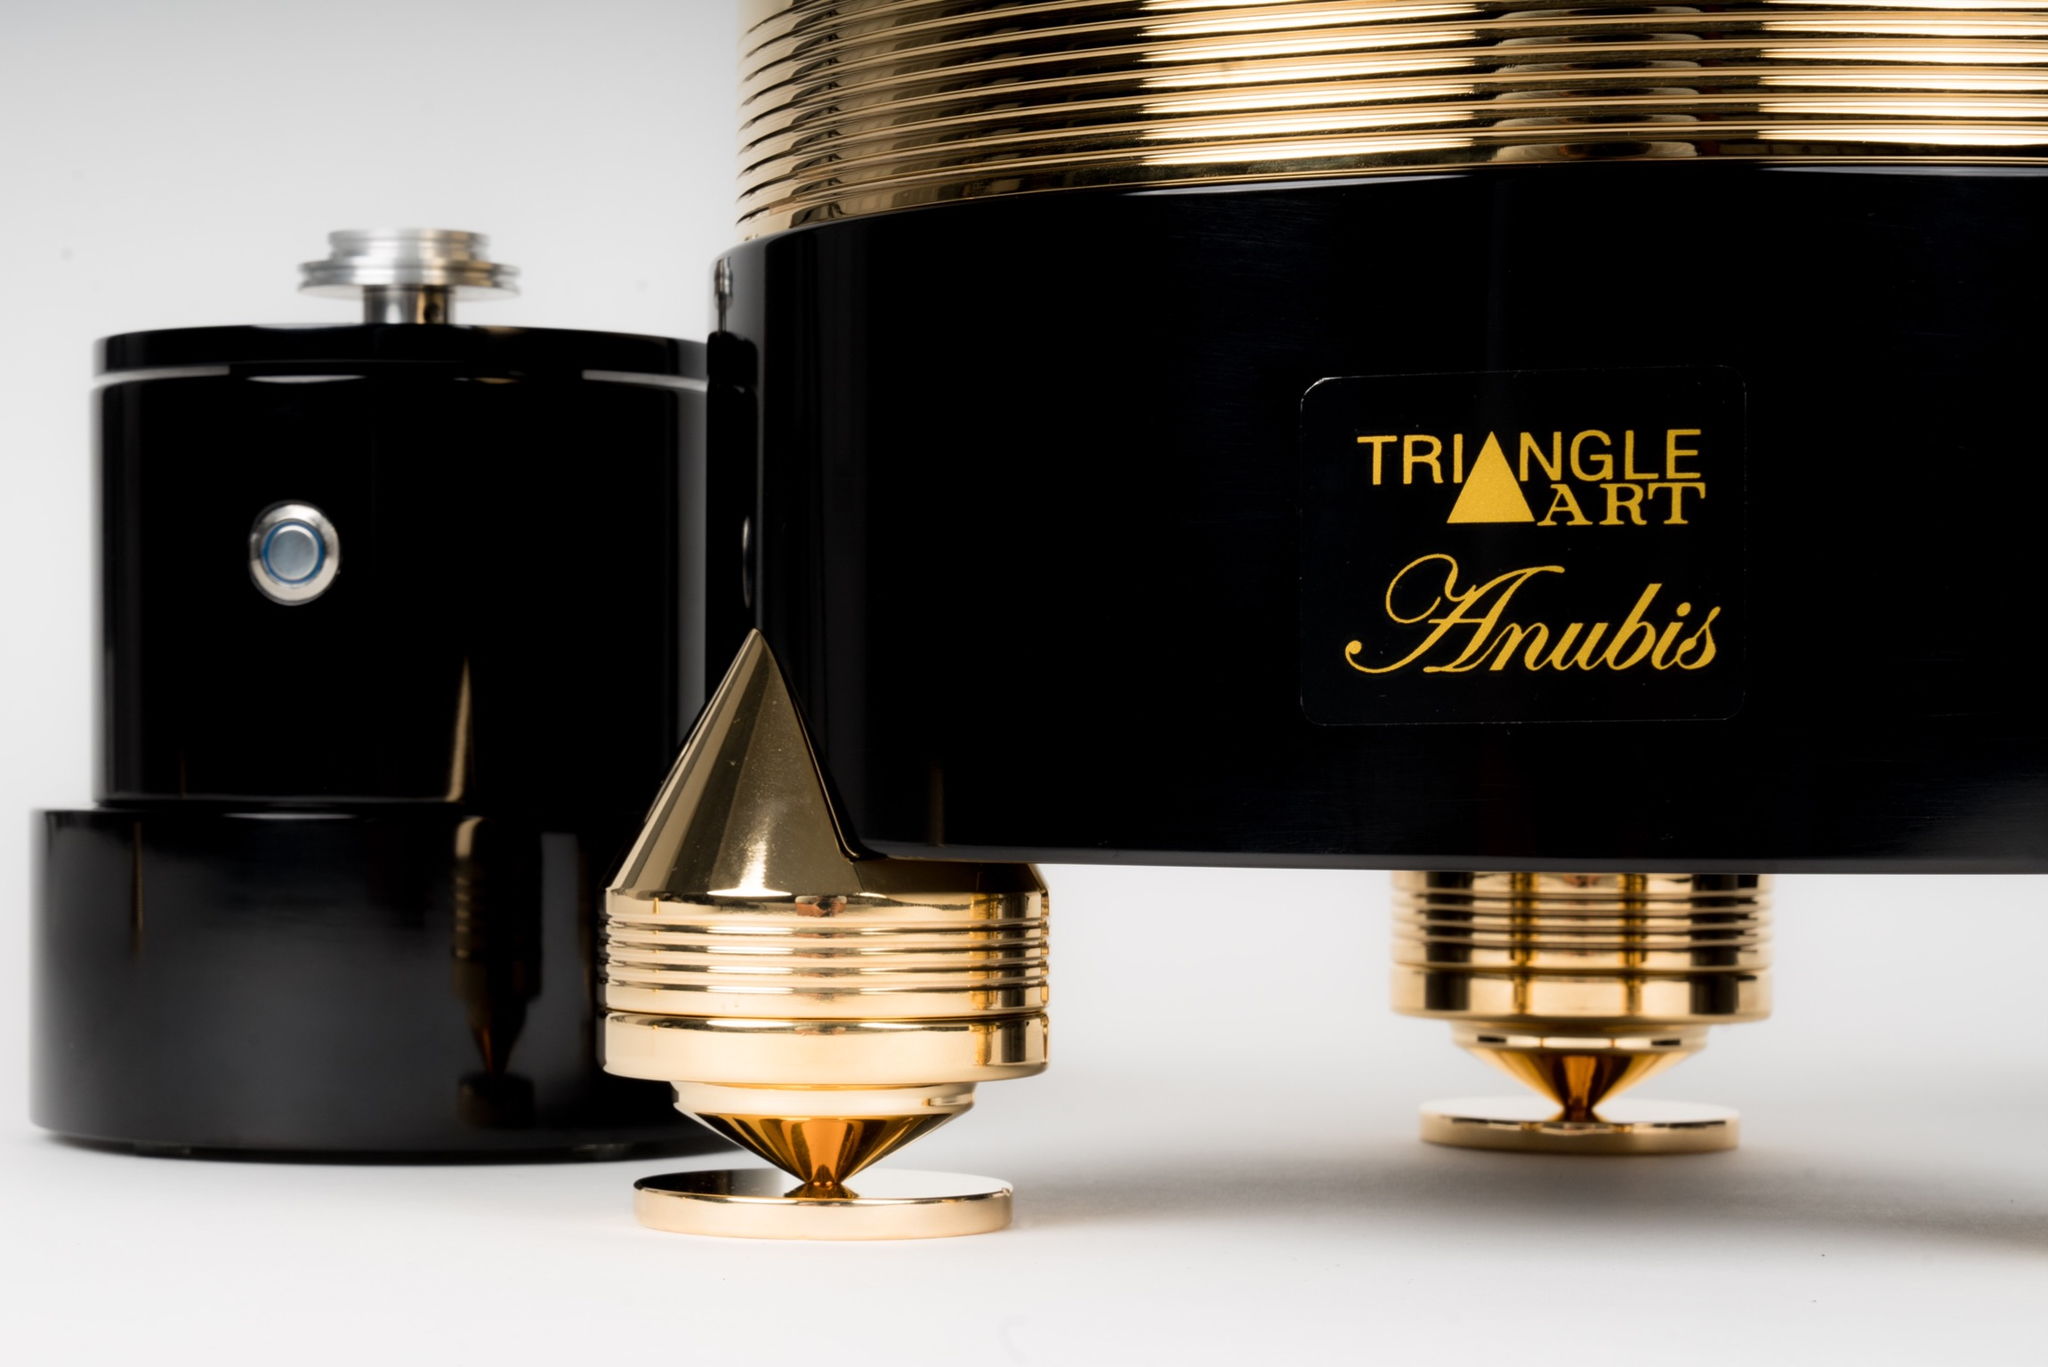 TriangleART Anubis Turntable ( Sale Event ) 8